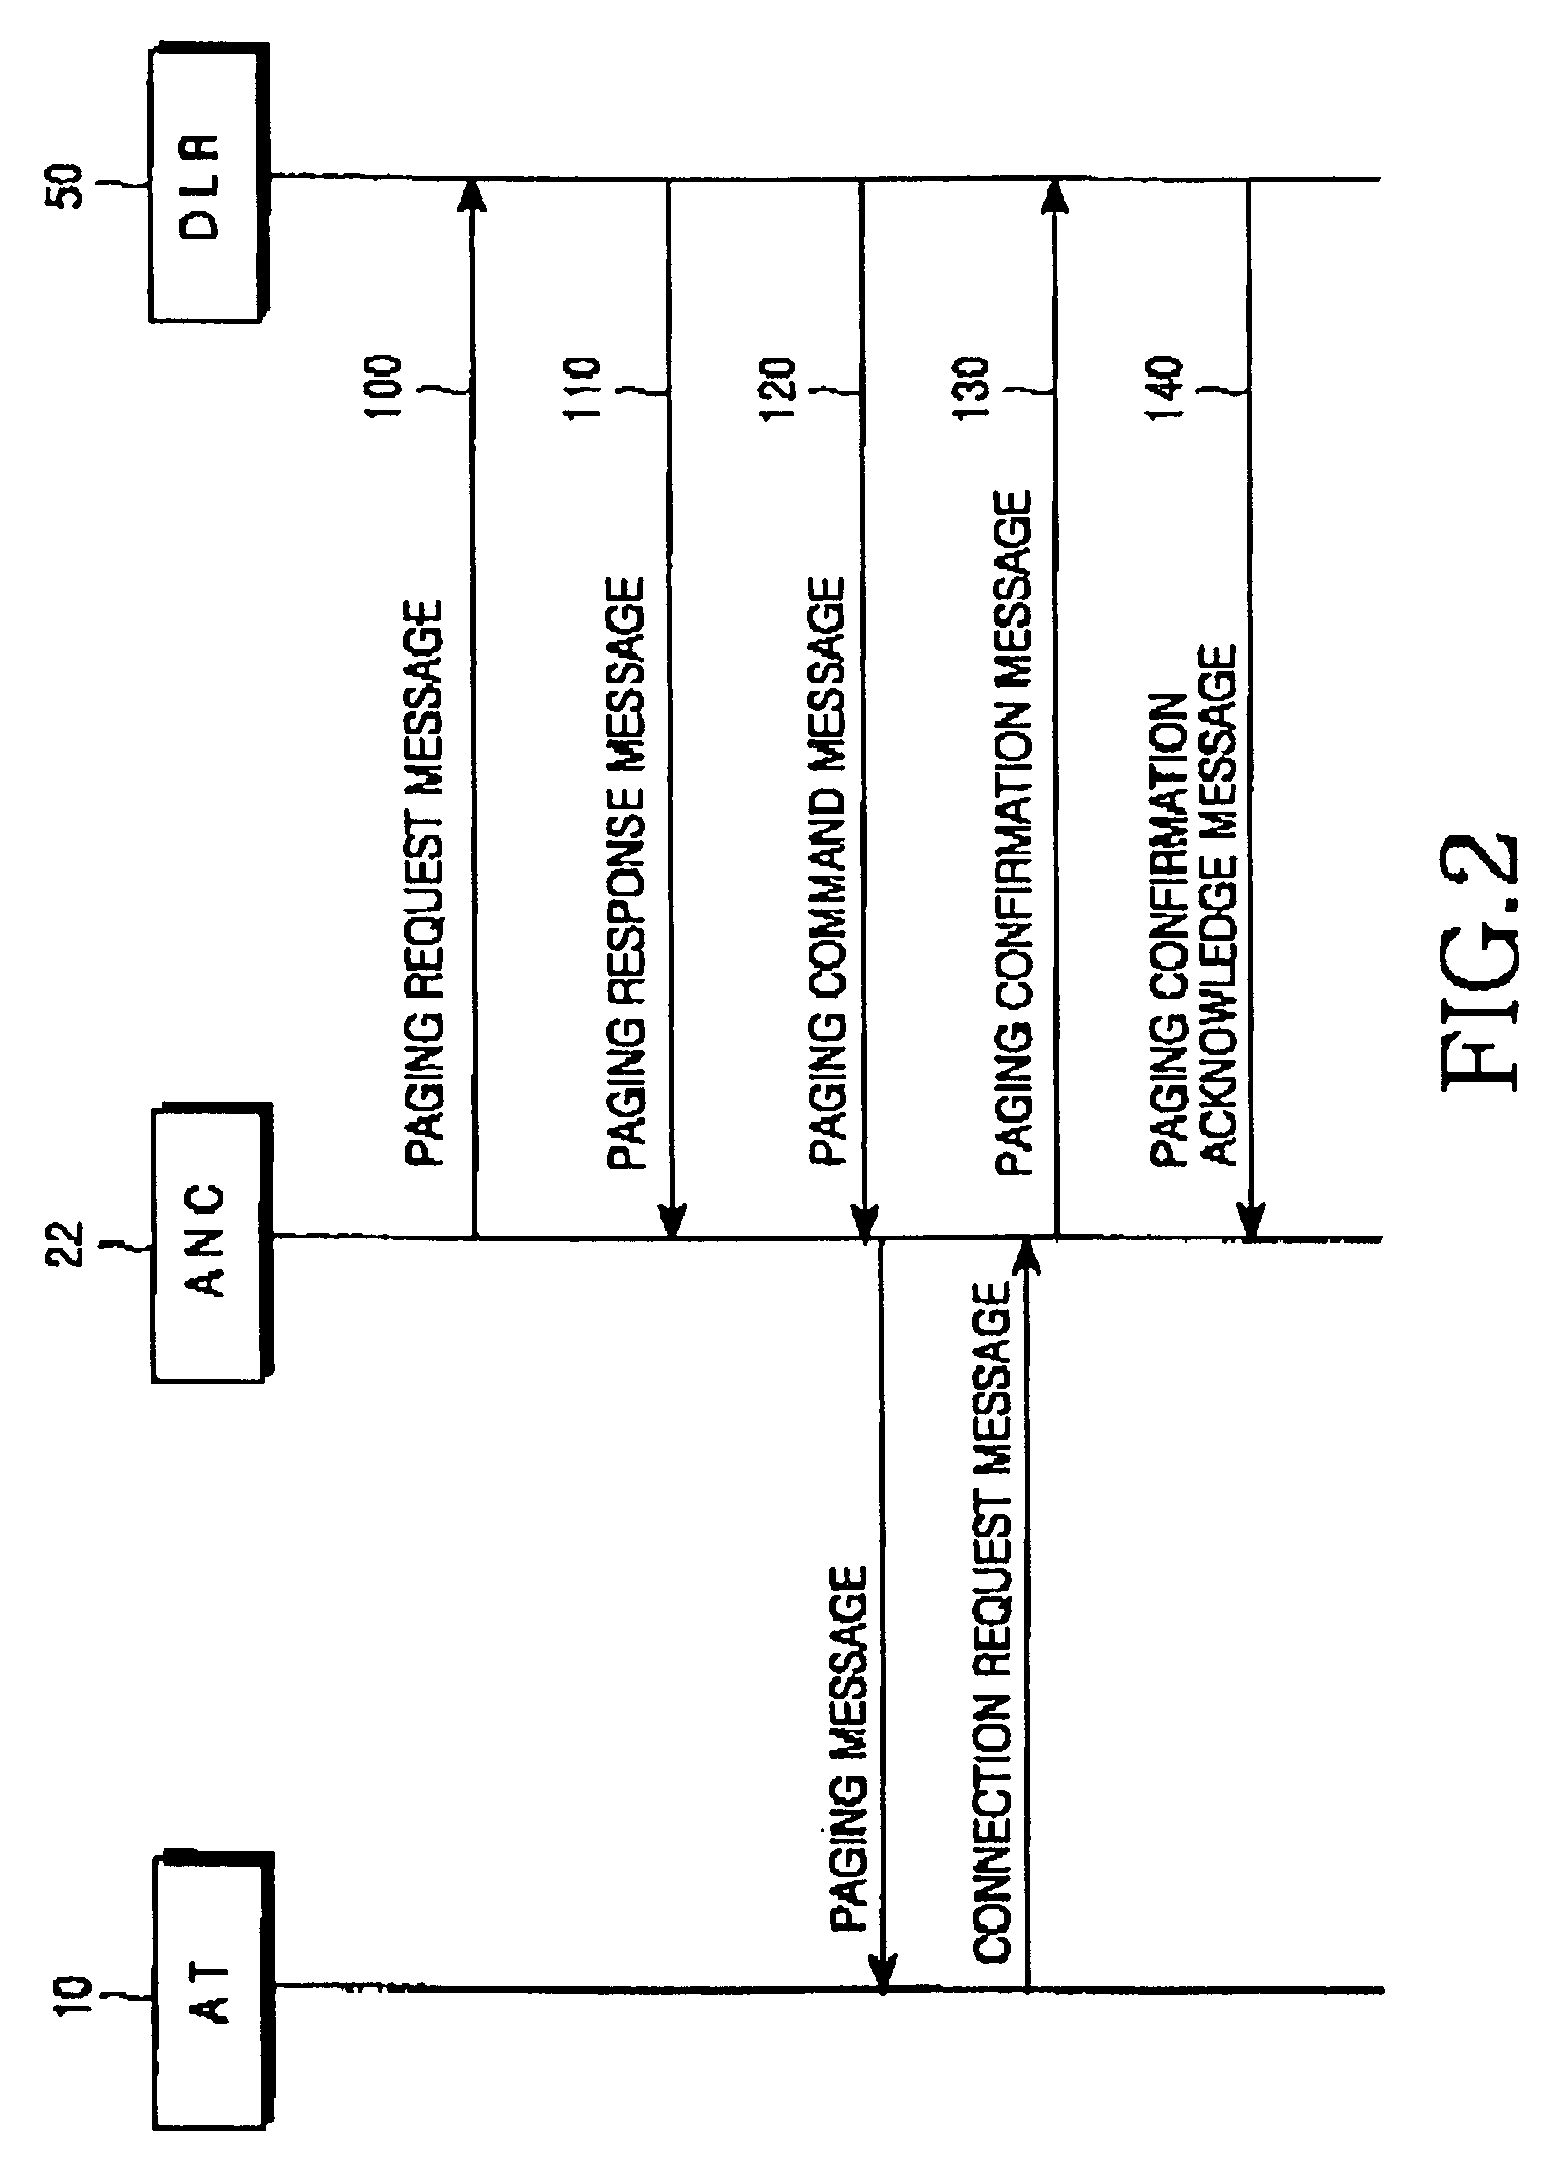 Signaling method for paging in a mobile communication system for high-speed packet data transmission